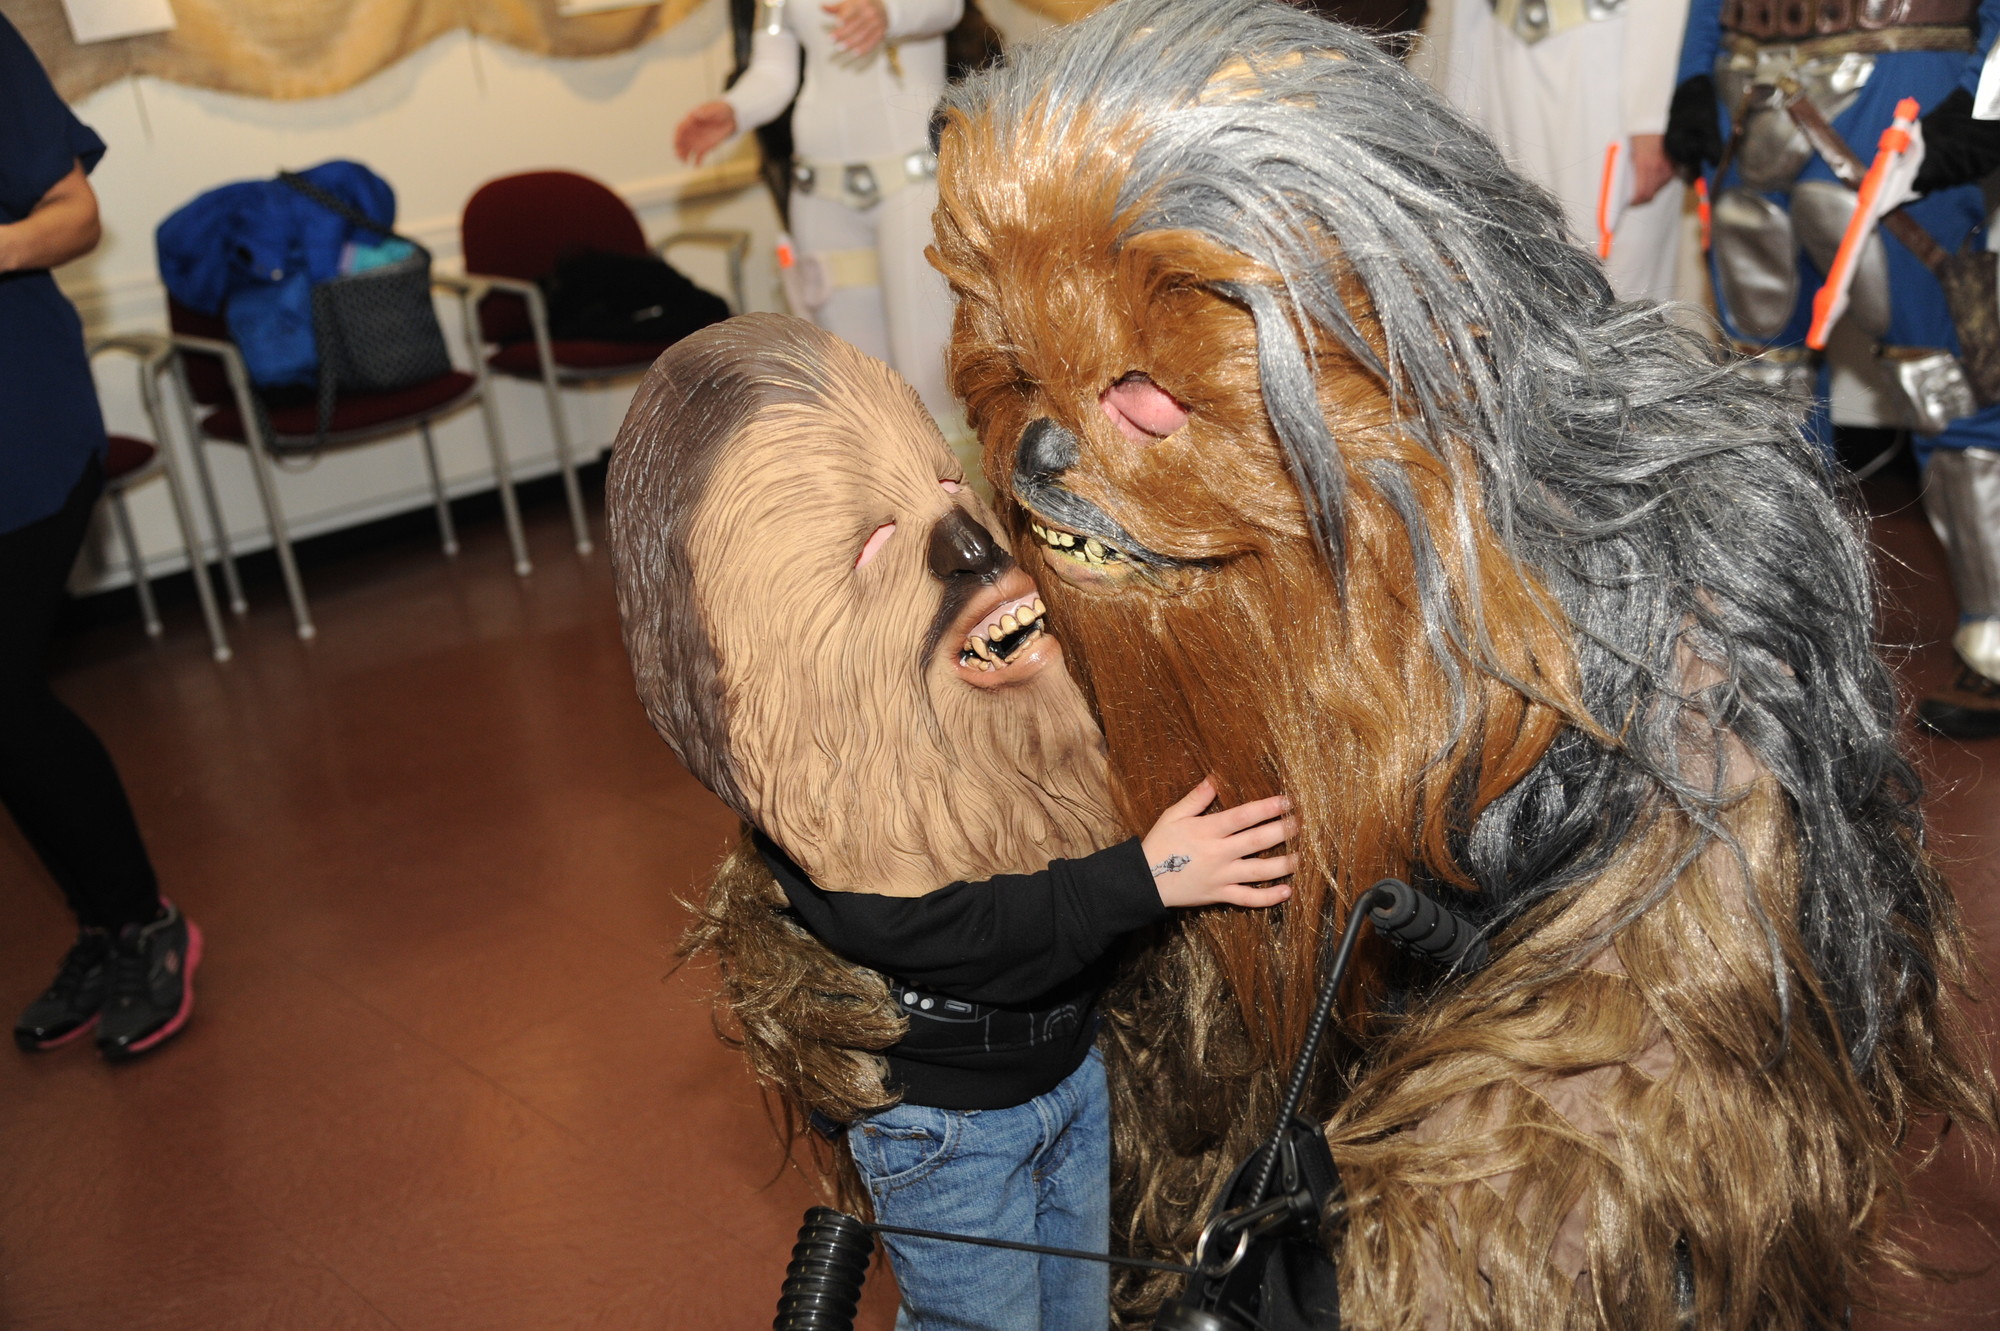 Charlie Lamarca, 5, donned his Chewbacca garb to take a picture with “Chewie” himself.